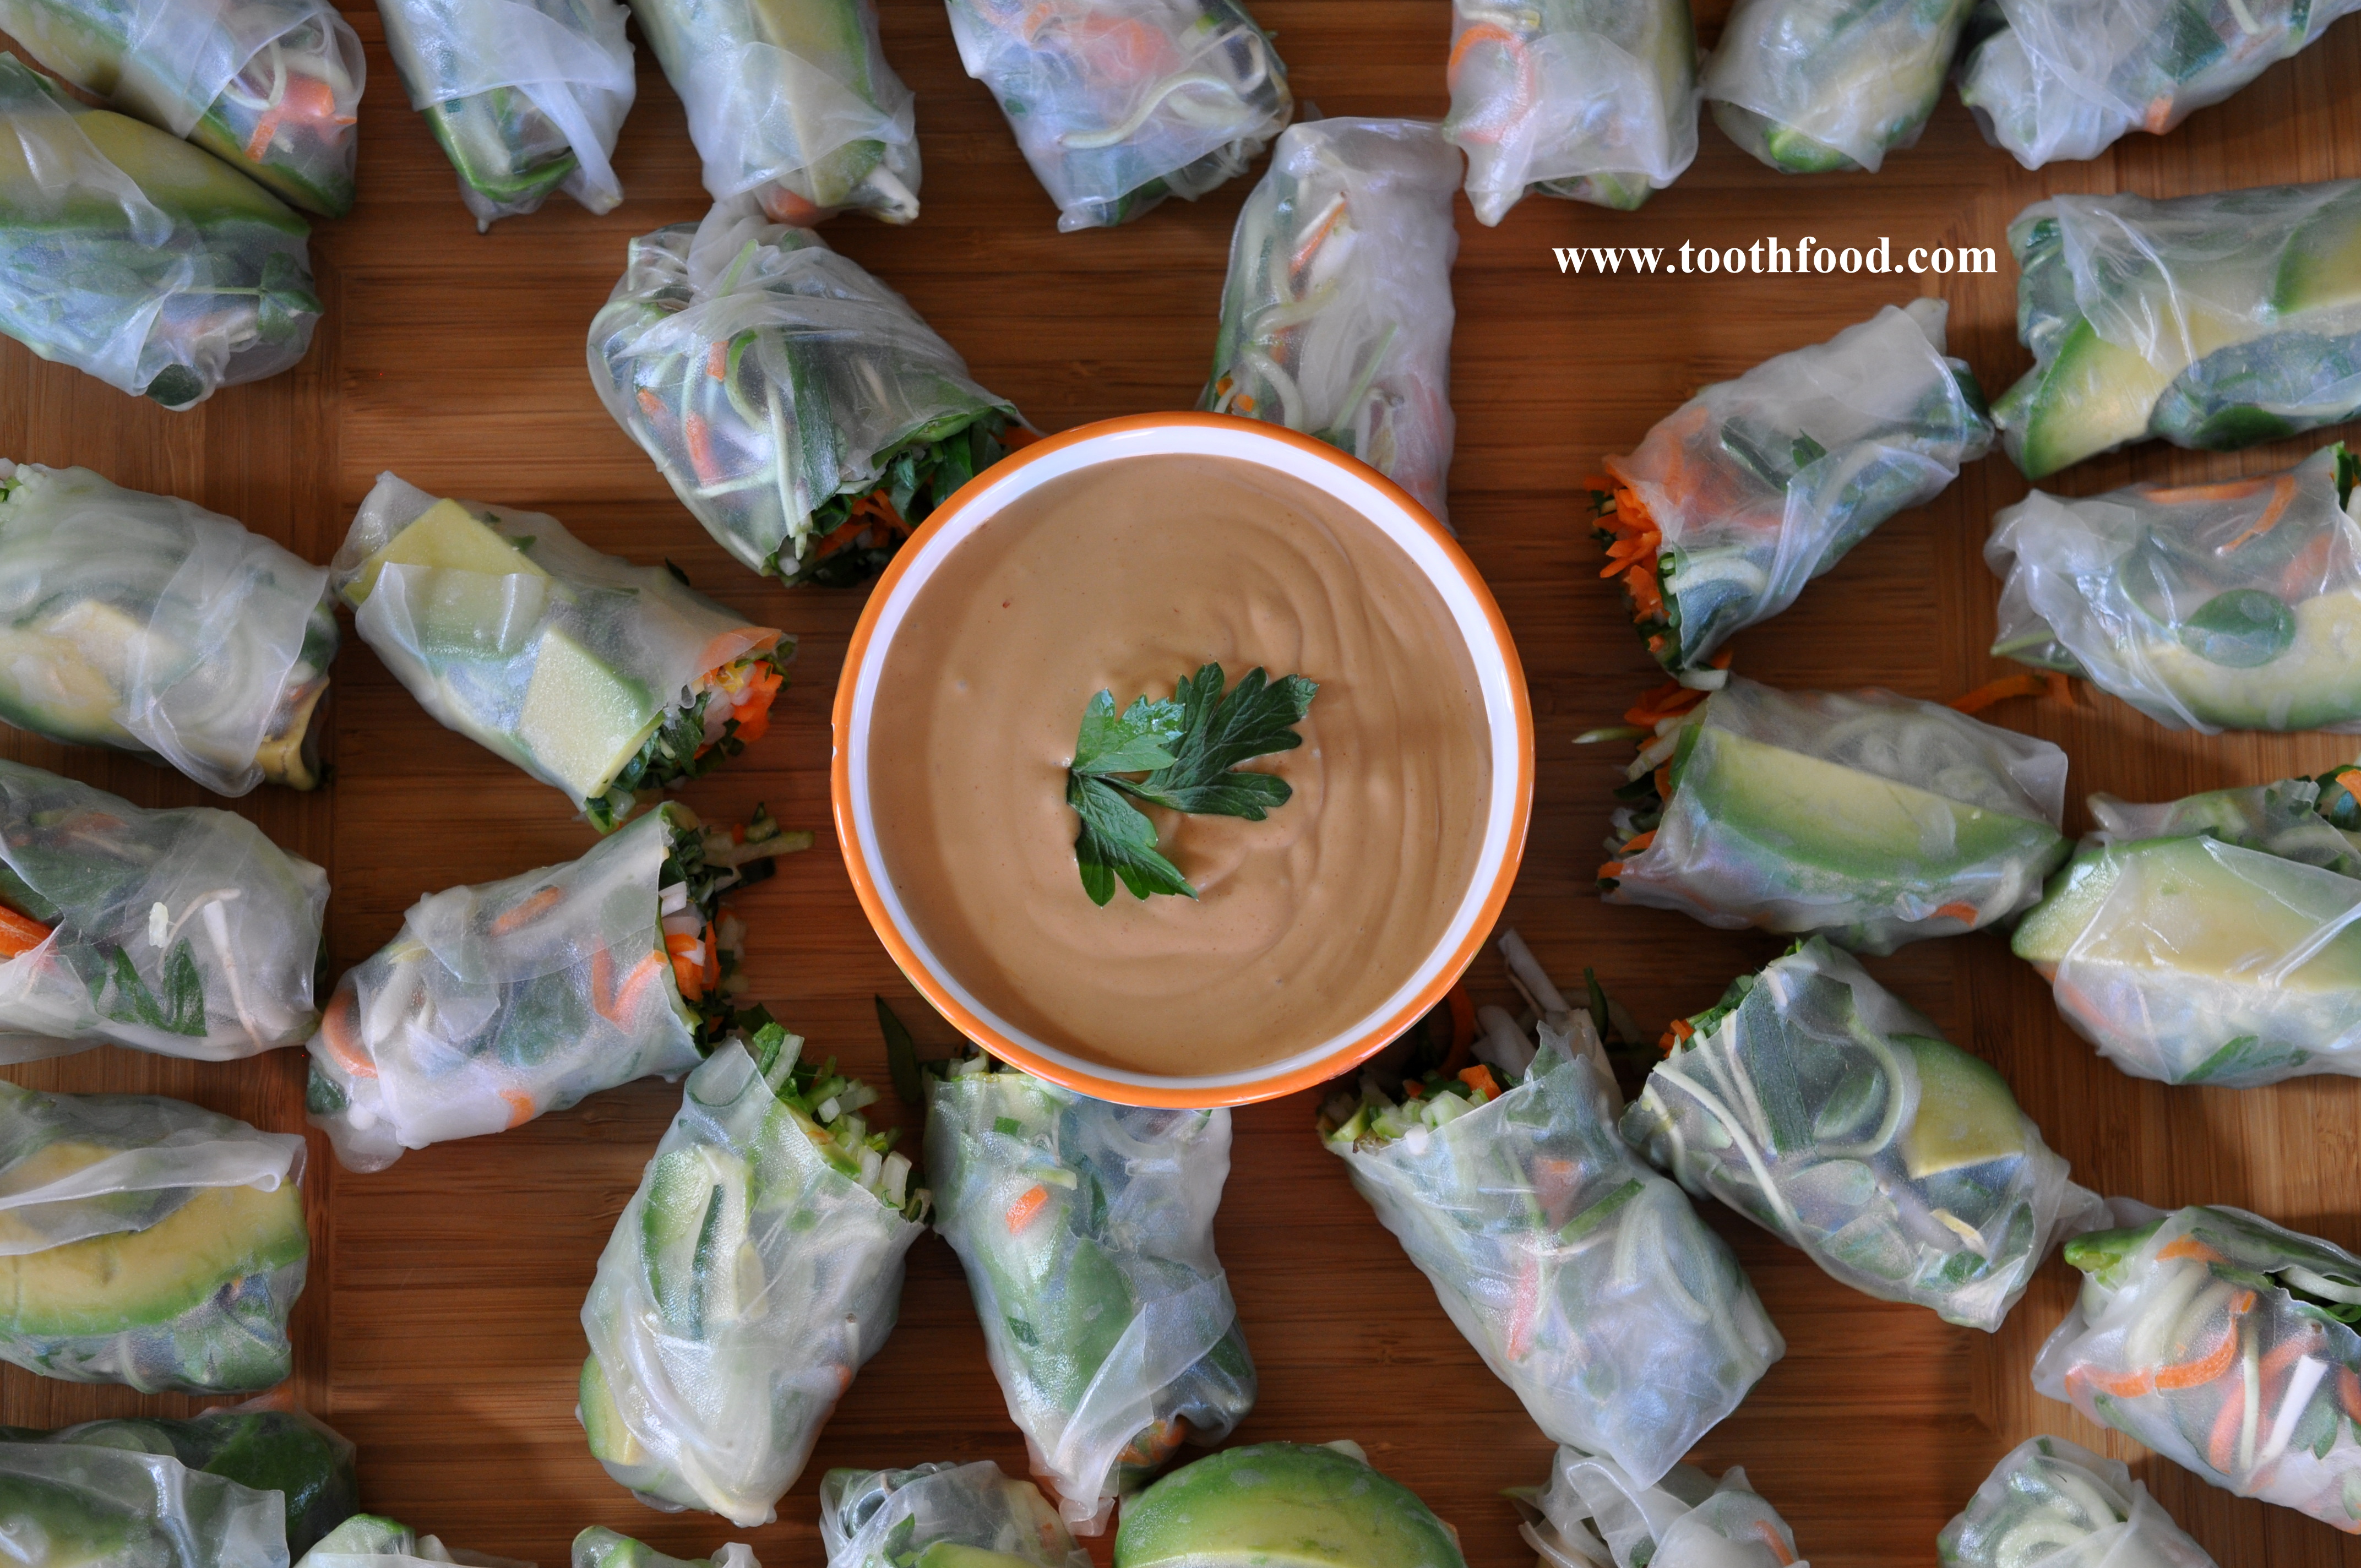 Summer Rolls With Peanut Dipping Sauce